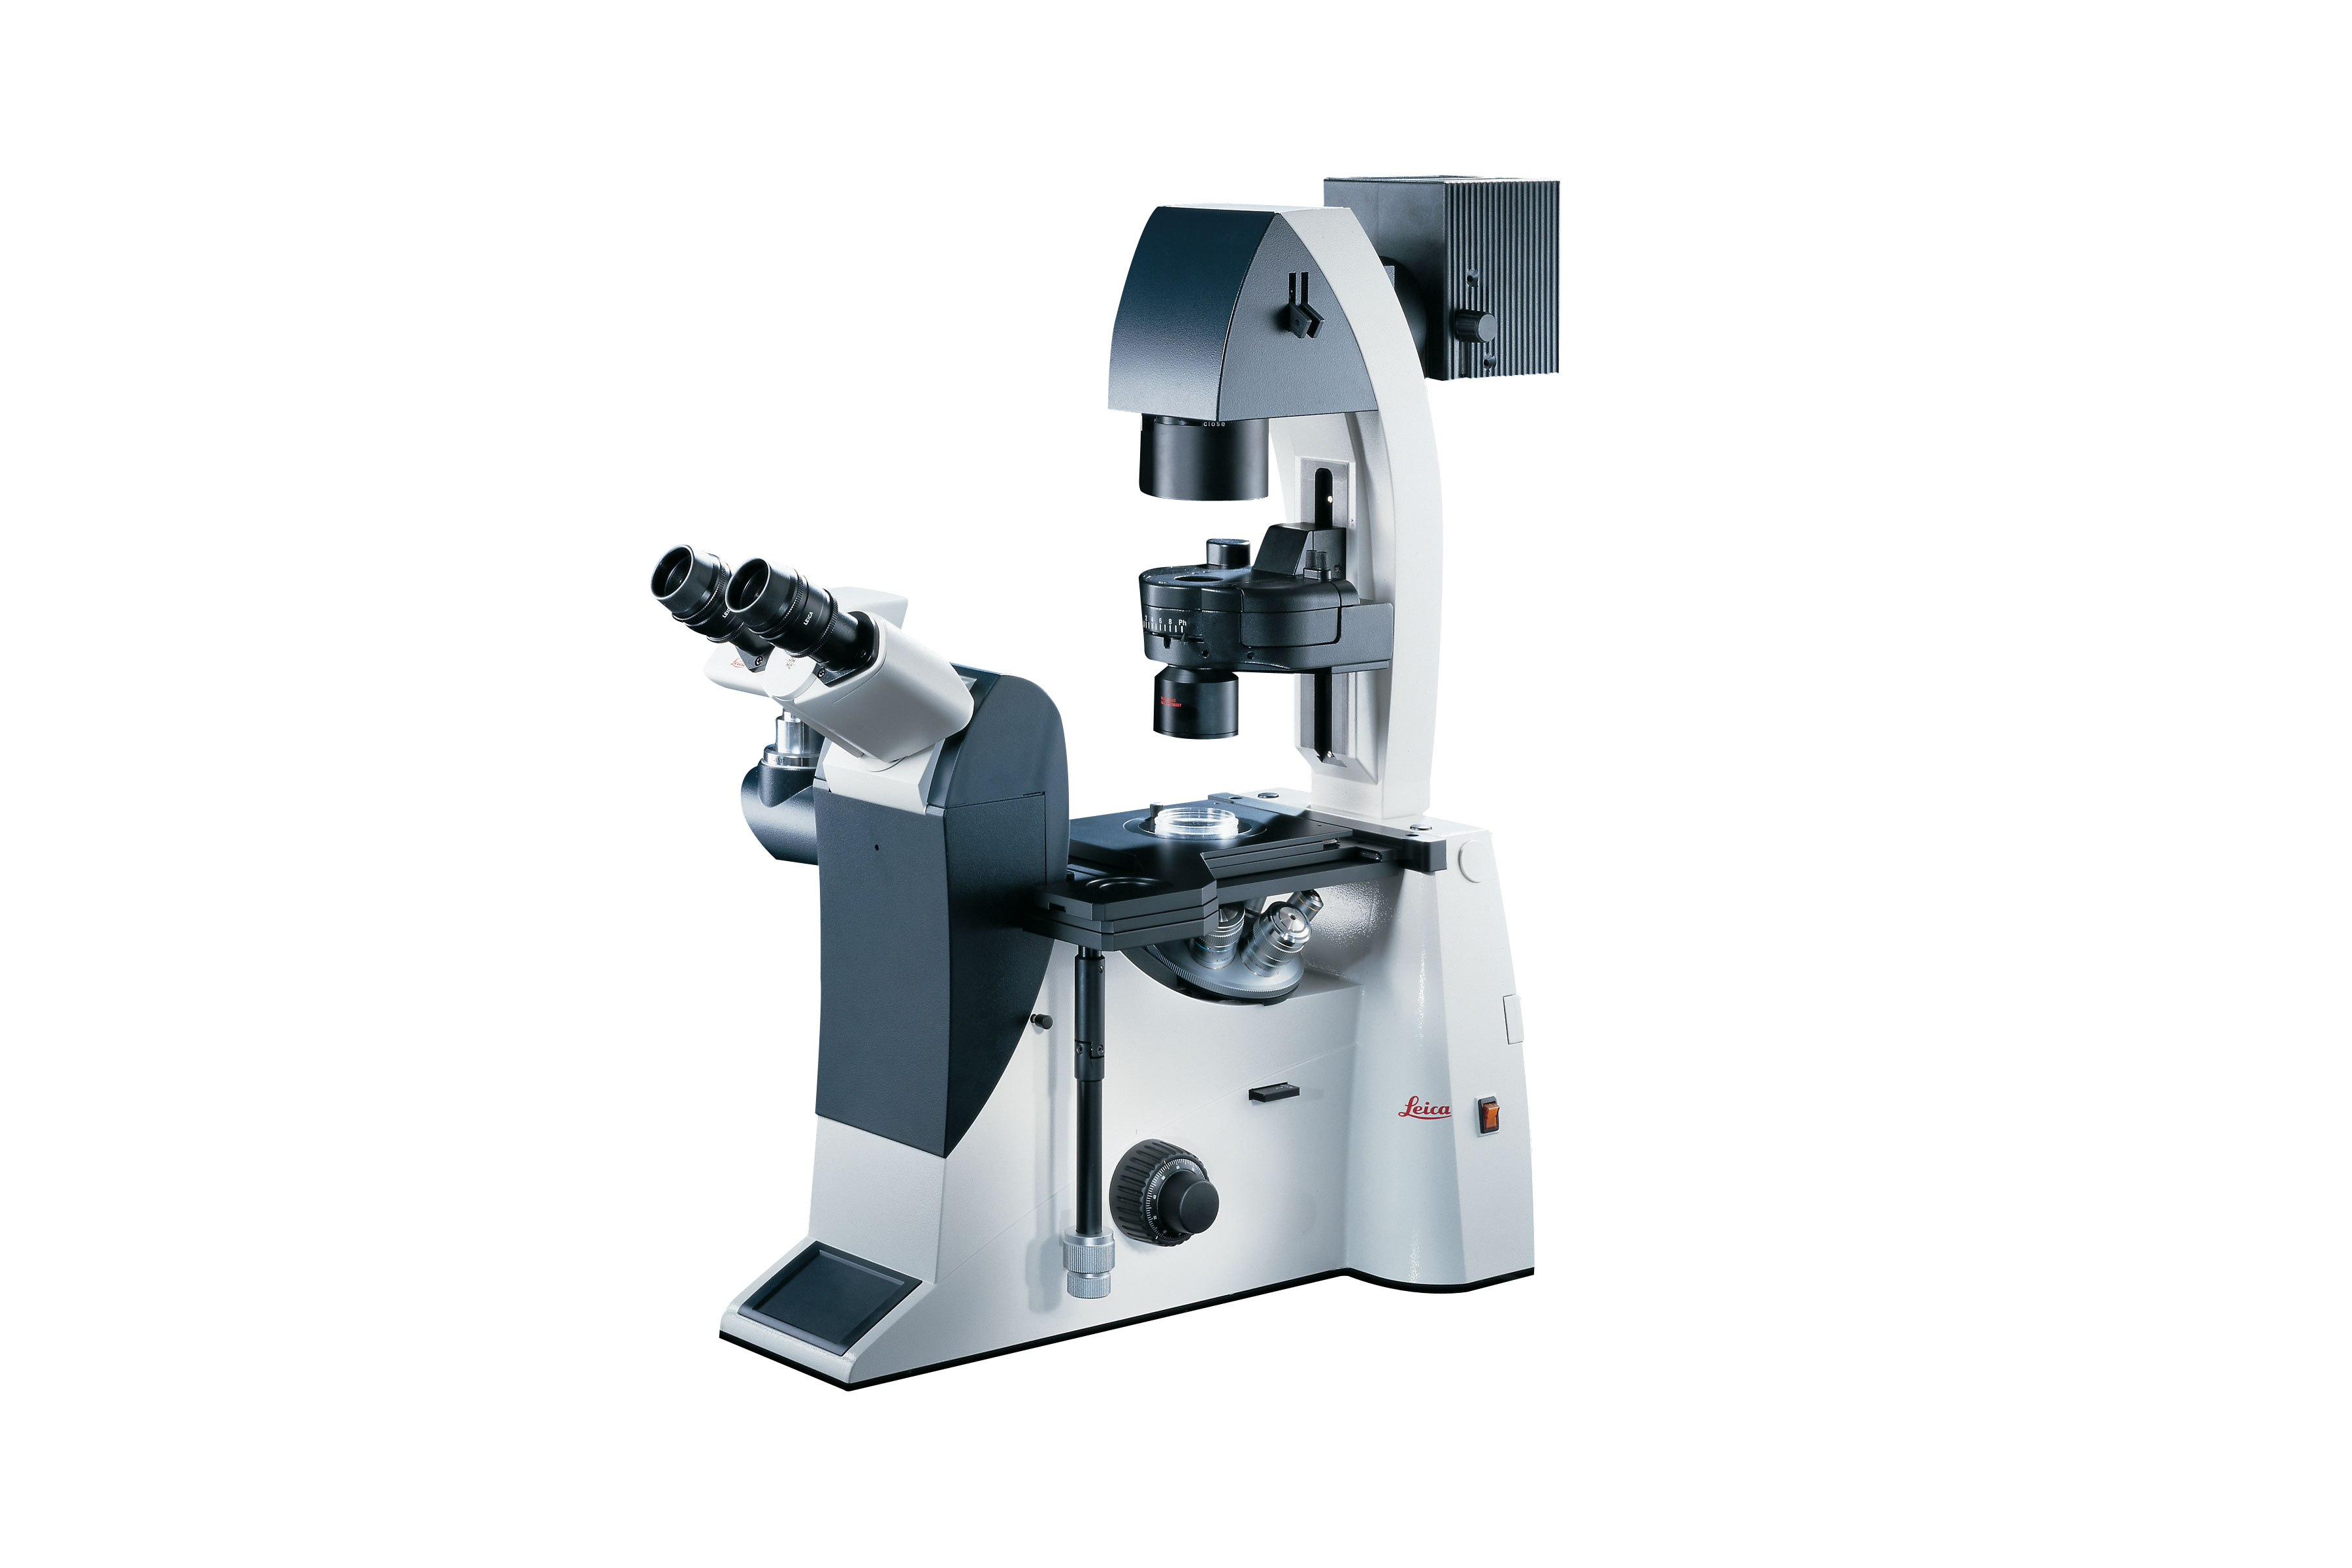 The Leica DMI3000 B is the first research microscope with direct access to the back focal plane to adapt to different contrasting techniques.